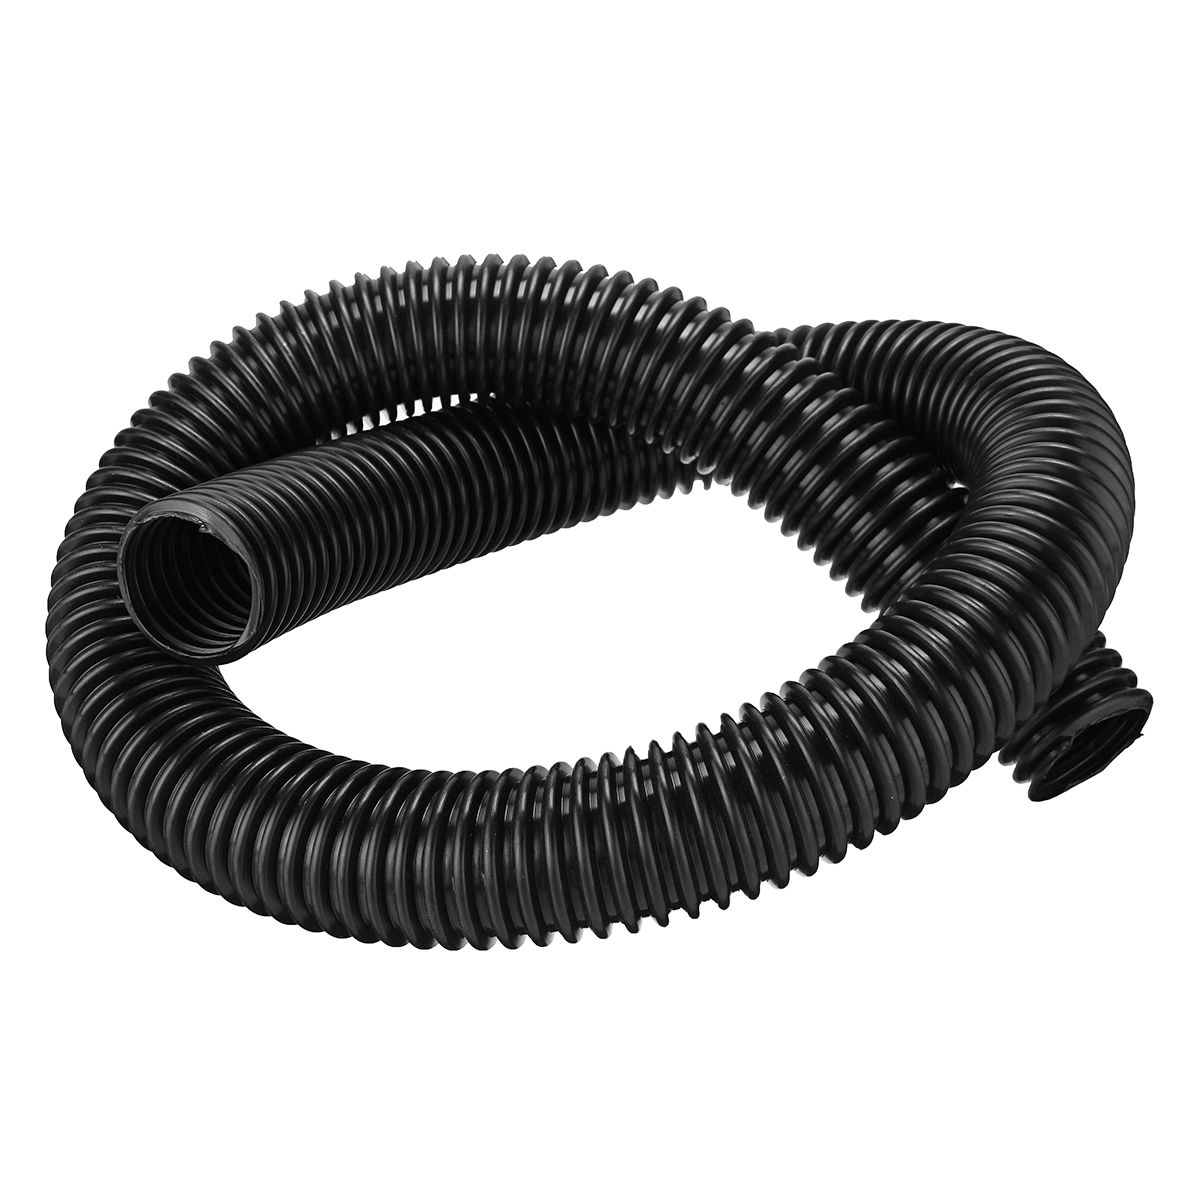 32mm-EVA-Flexible-Suction-Corrugated-Hose-Tube-Pipe-Vacuum-Cleaner-Accessory-Tool-Household-1382435